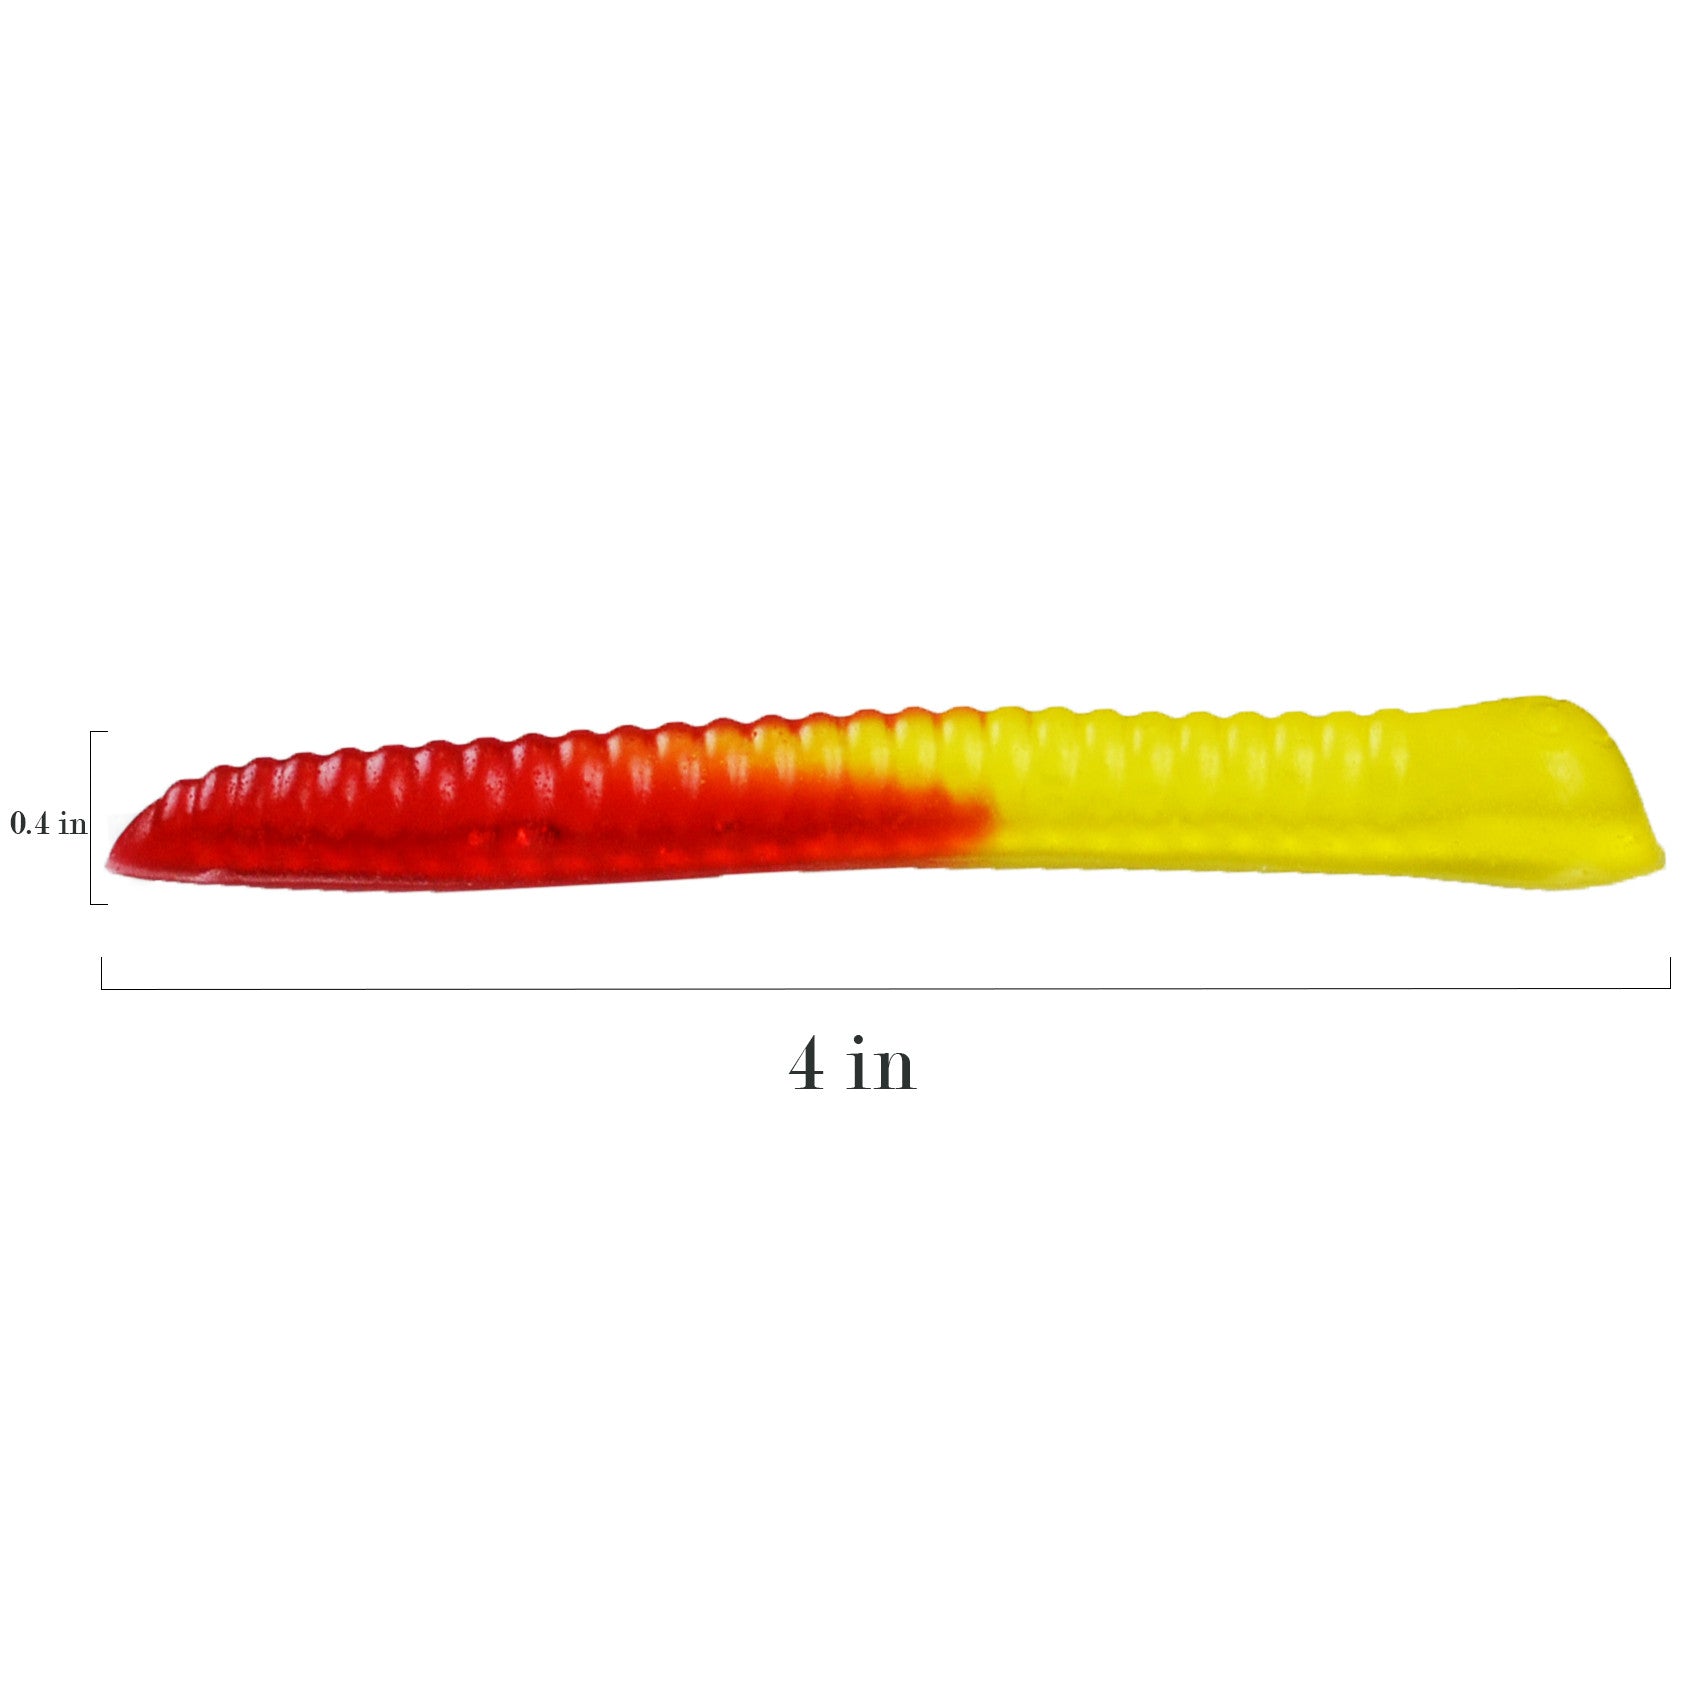 Avery Road Homewares Gummy Worm Mold Silicone – 2 PACK & BONUS DROPPER –  Non-Stick 40 Worms Candy Molds and Recipe PDF – Making Gummi Chocolate & Gel